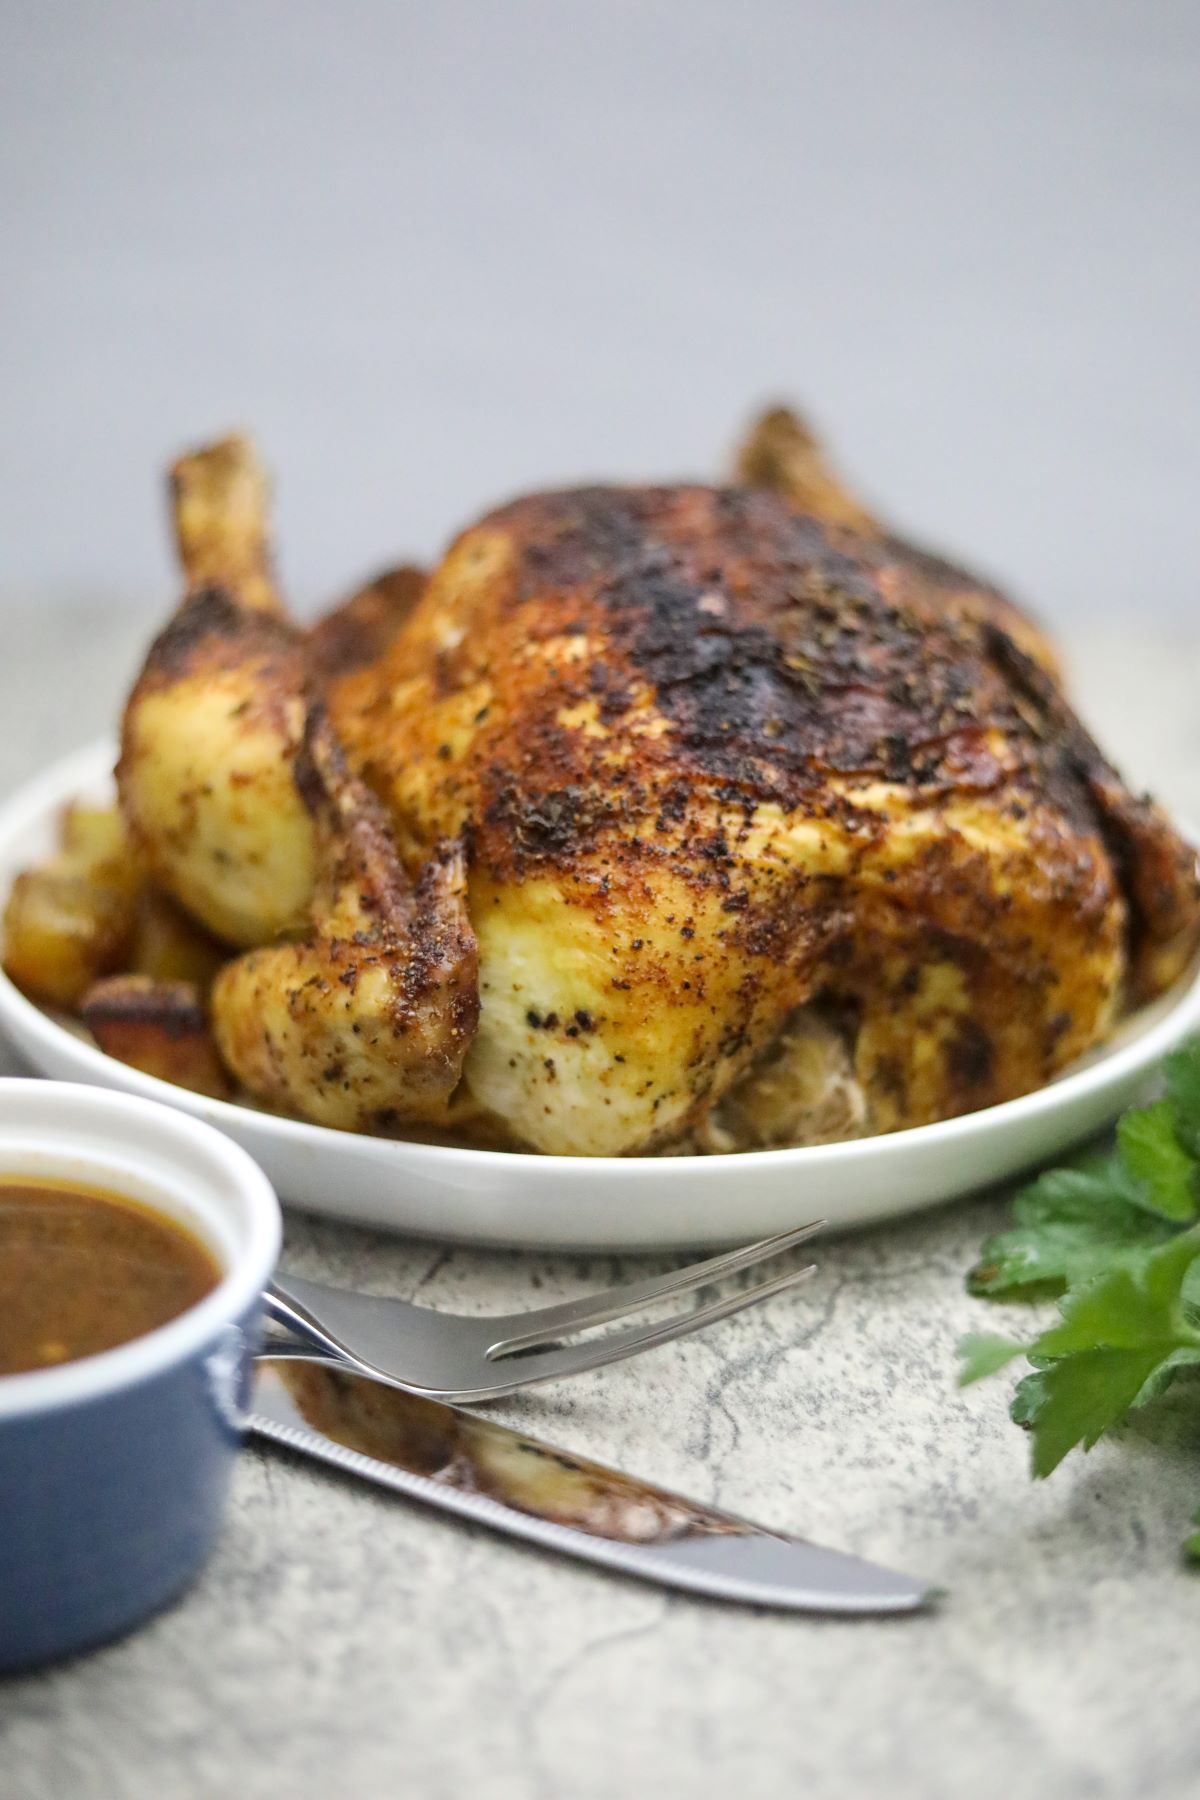 Vertical image of a roasted blackened chicken on a plate with carving knfe